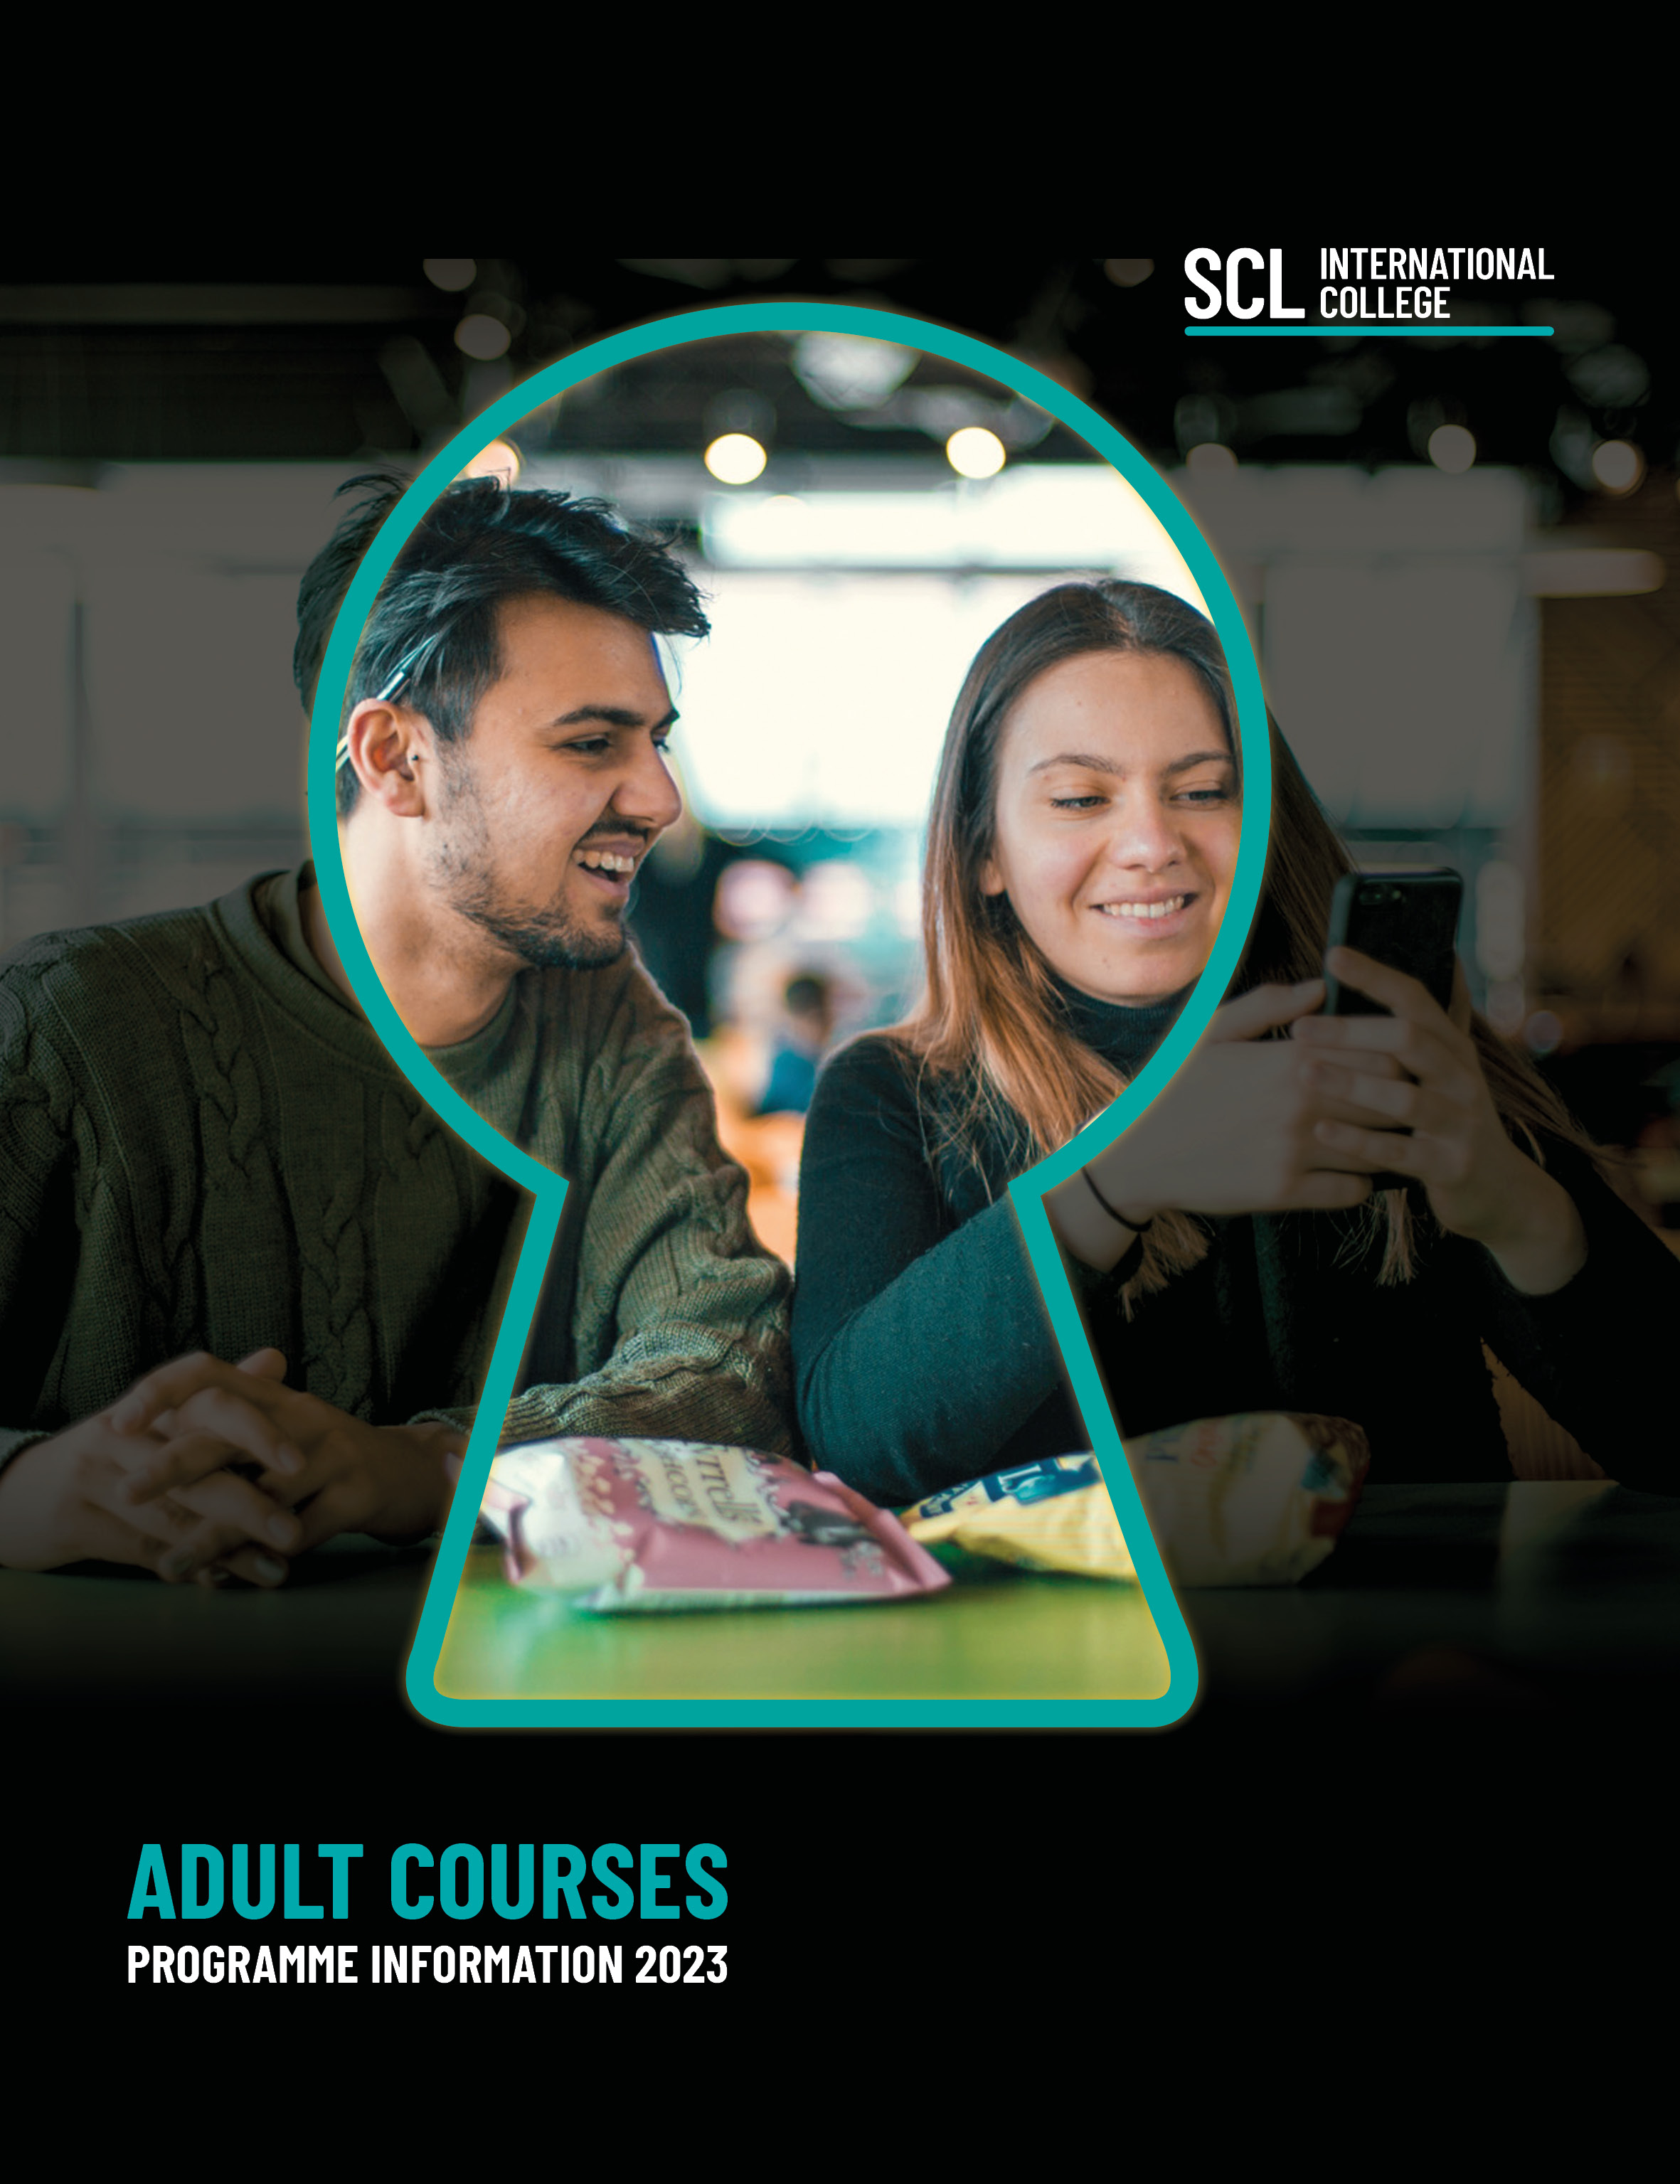 Adult-Courses-Brochure-2023-Cover-SCL-International-College